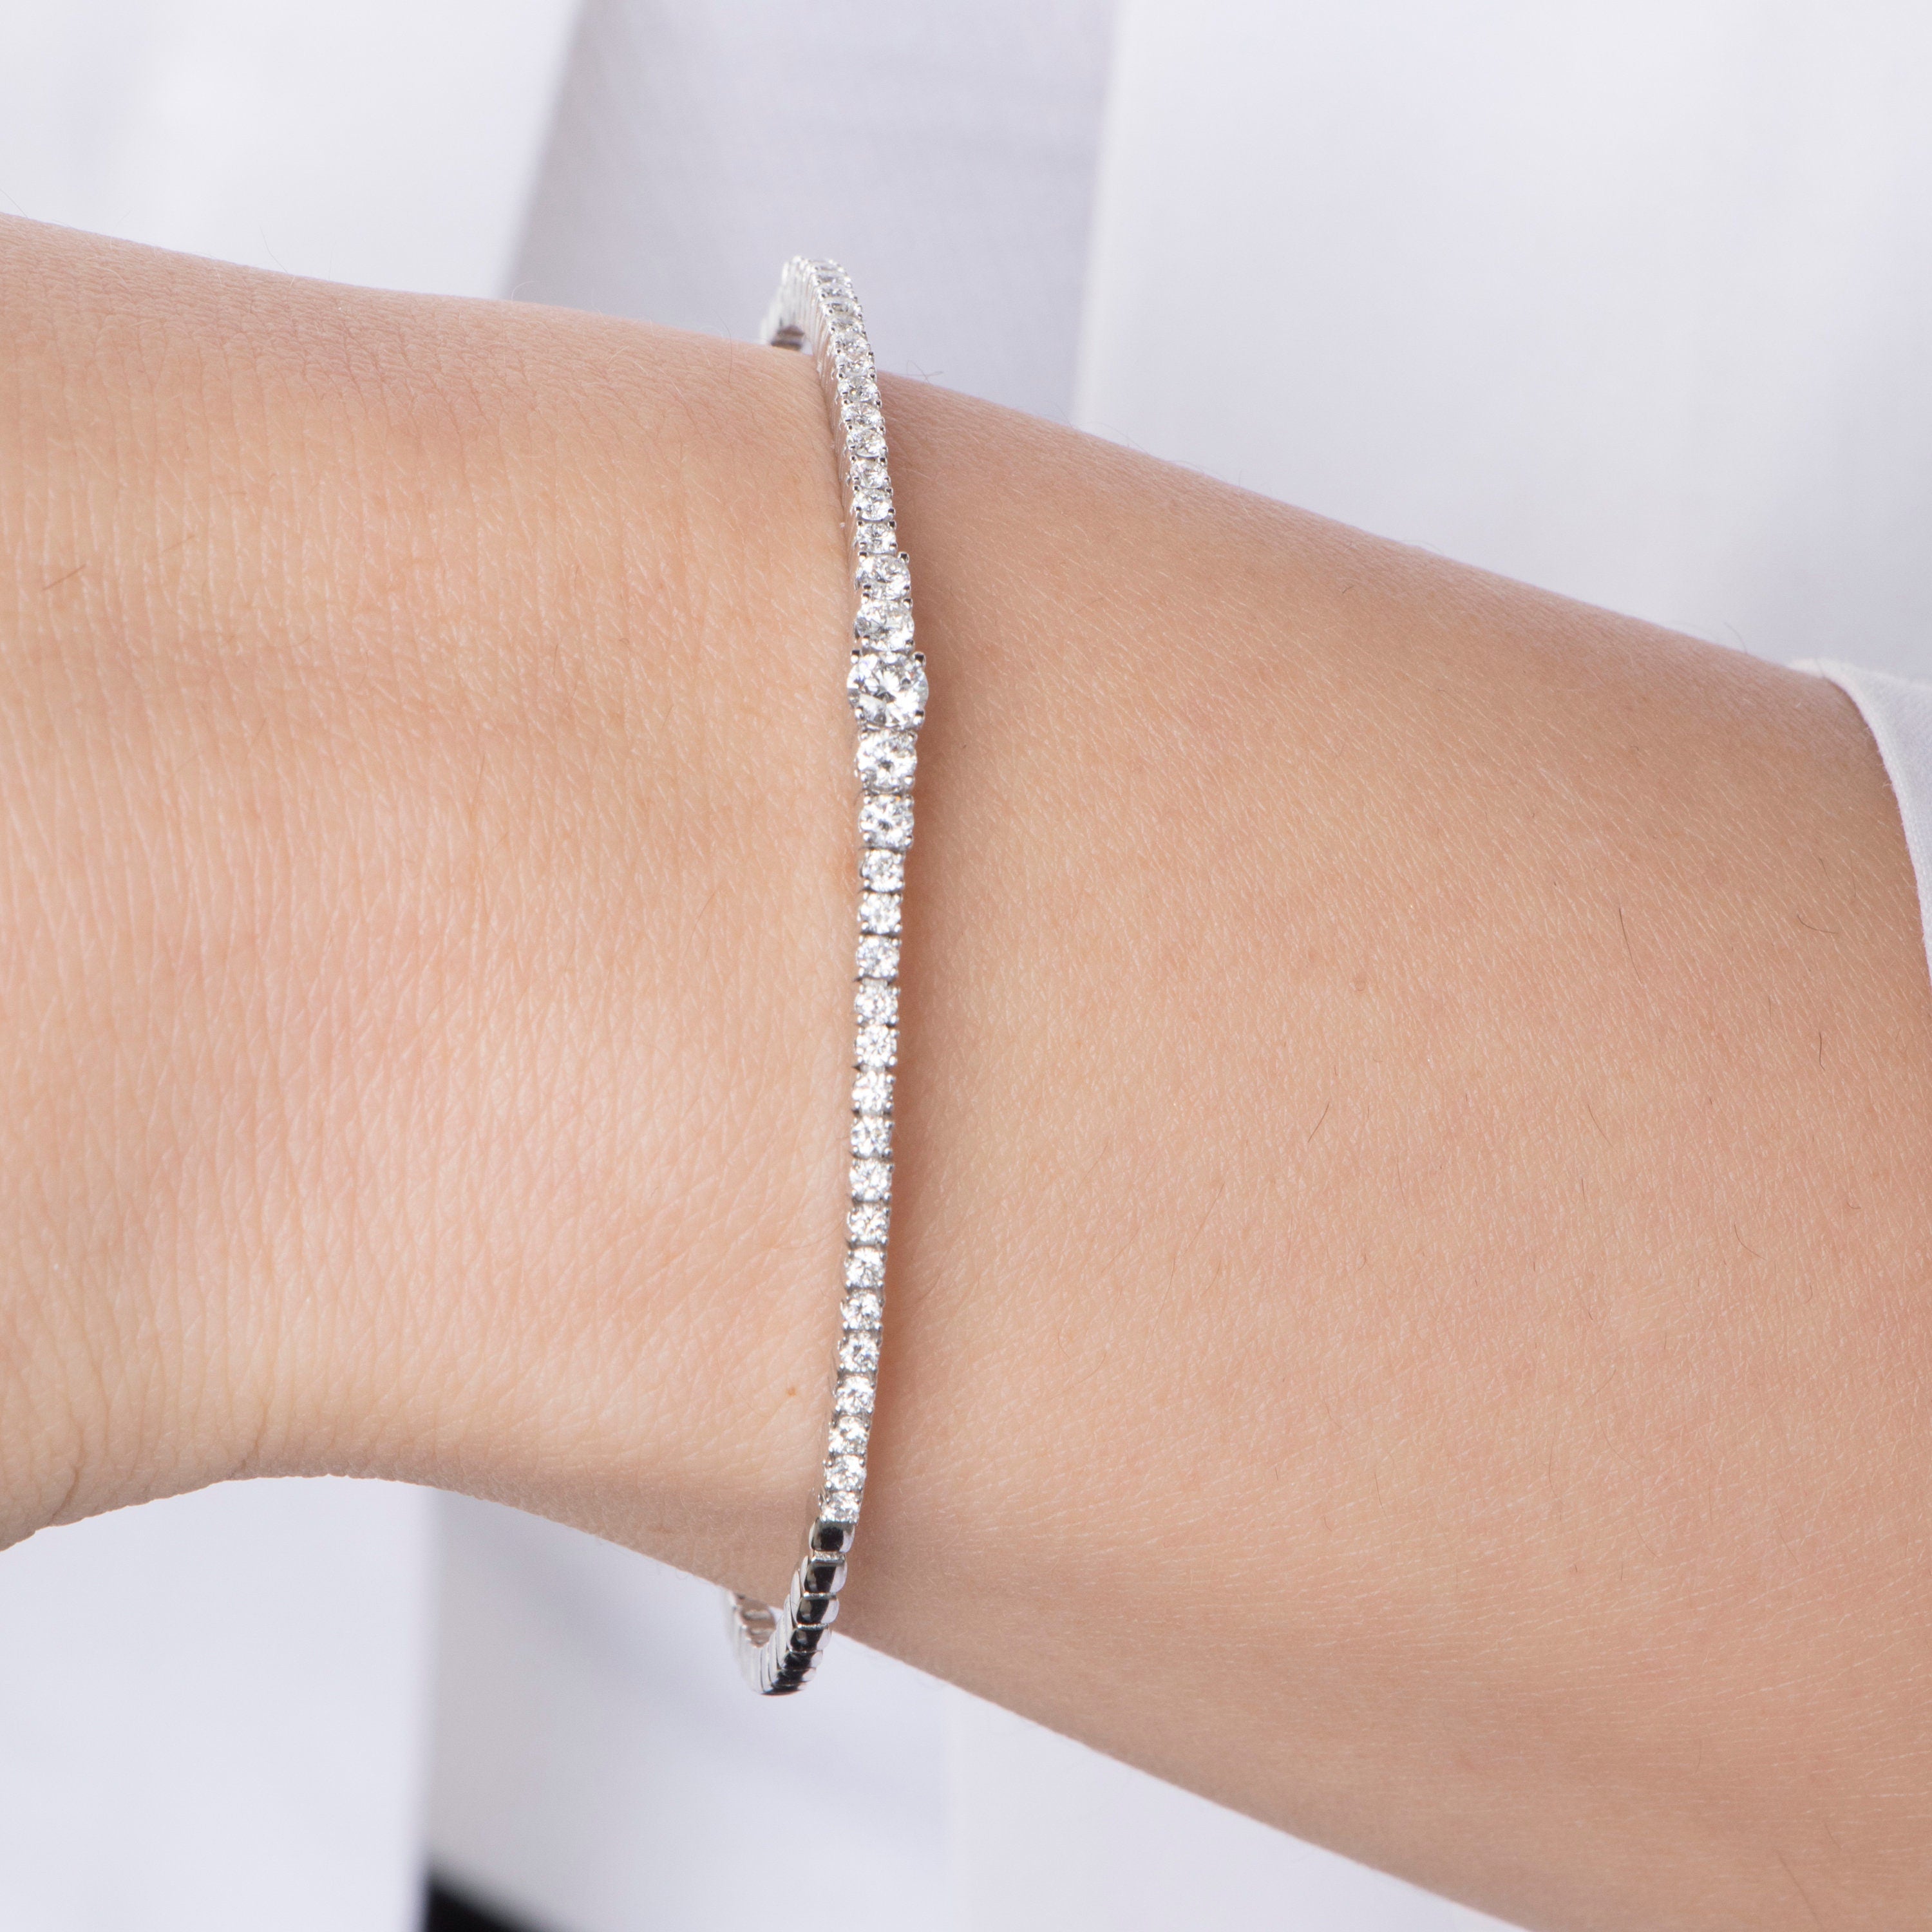 Graduated Diamond Bangle Available in 14K and 18K Gold